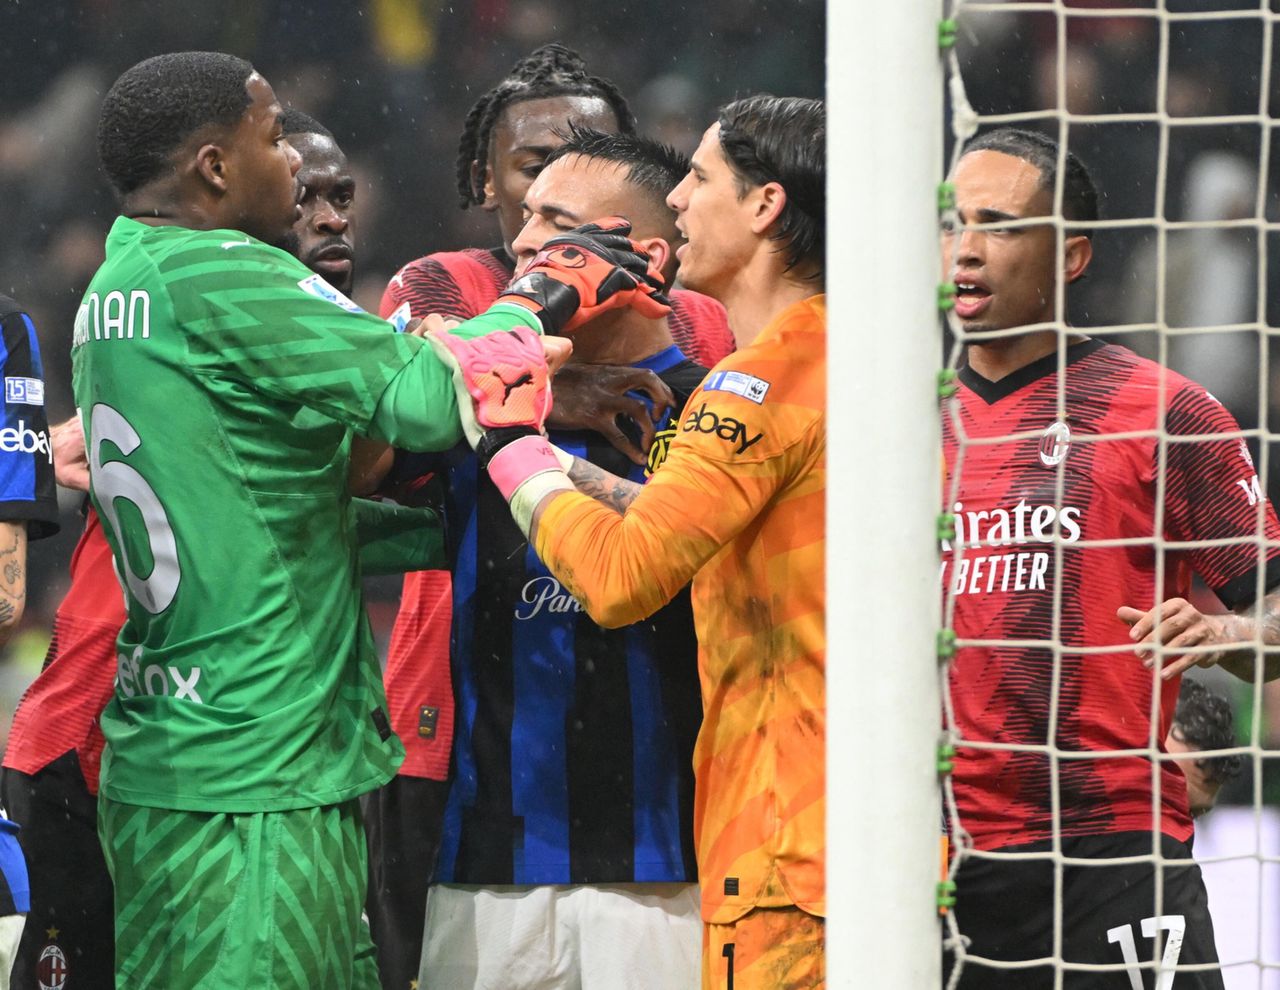 Inter Milan's triumph over AC Milan: A victory marred by music